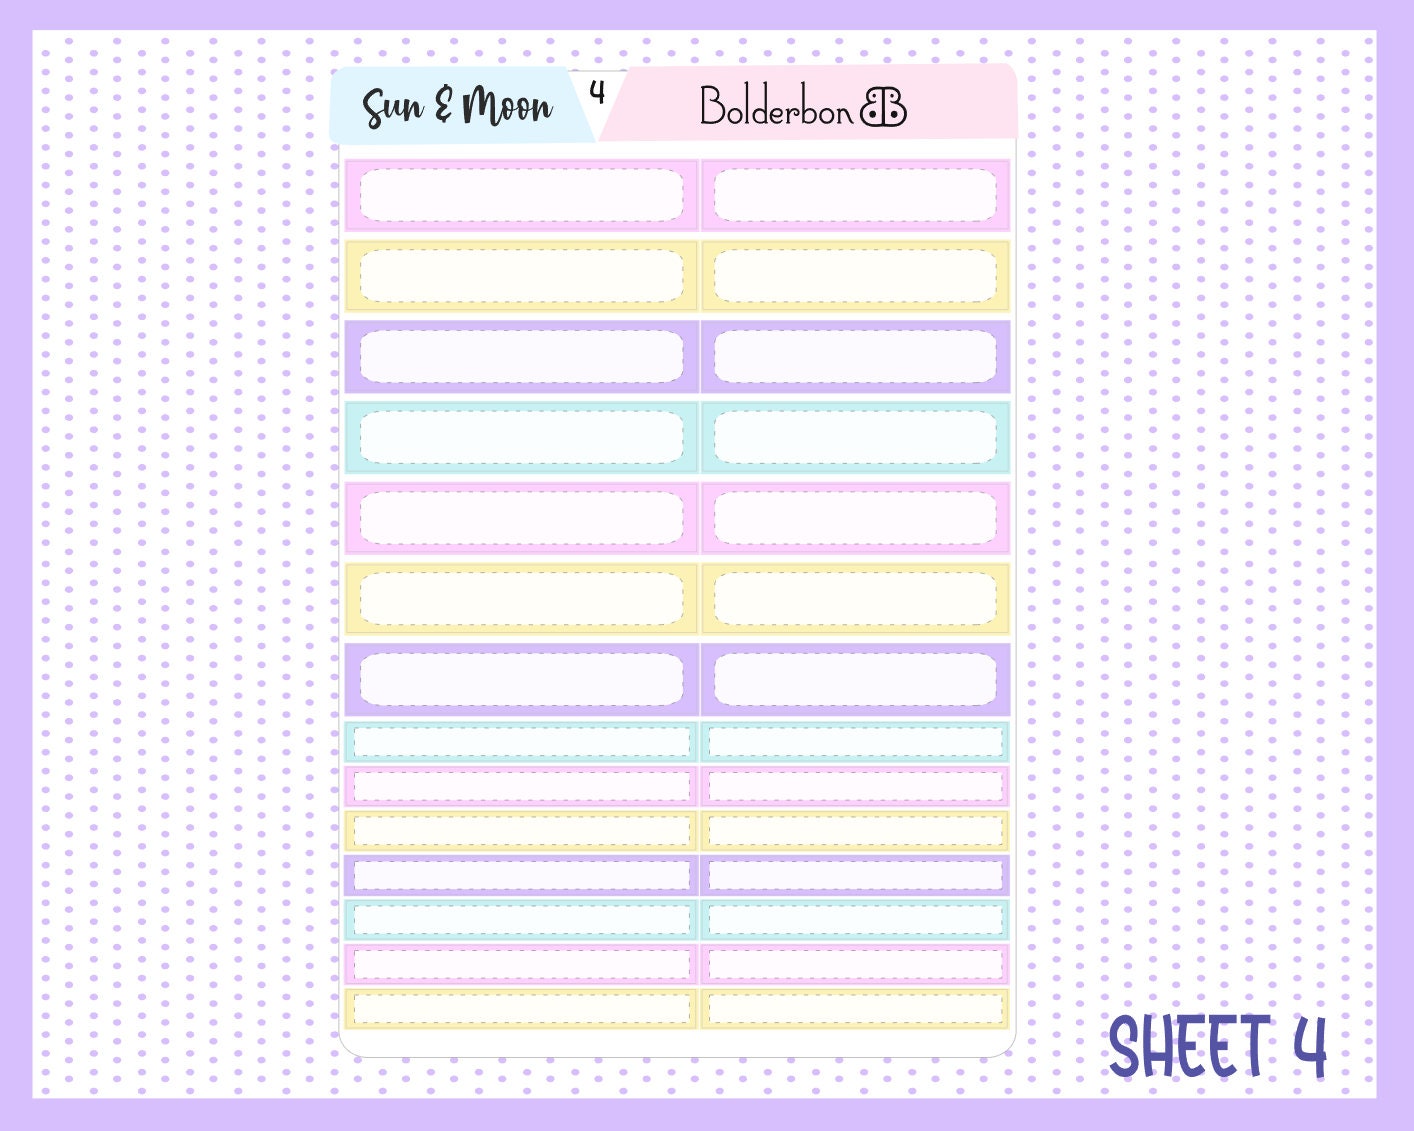 SUN & MOON || A5 Daily Duo Planner Sticker Kit